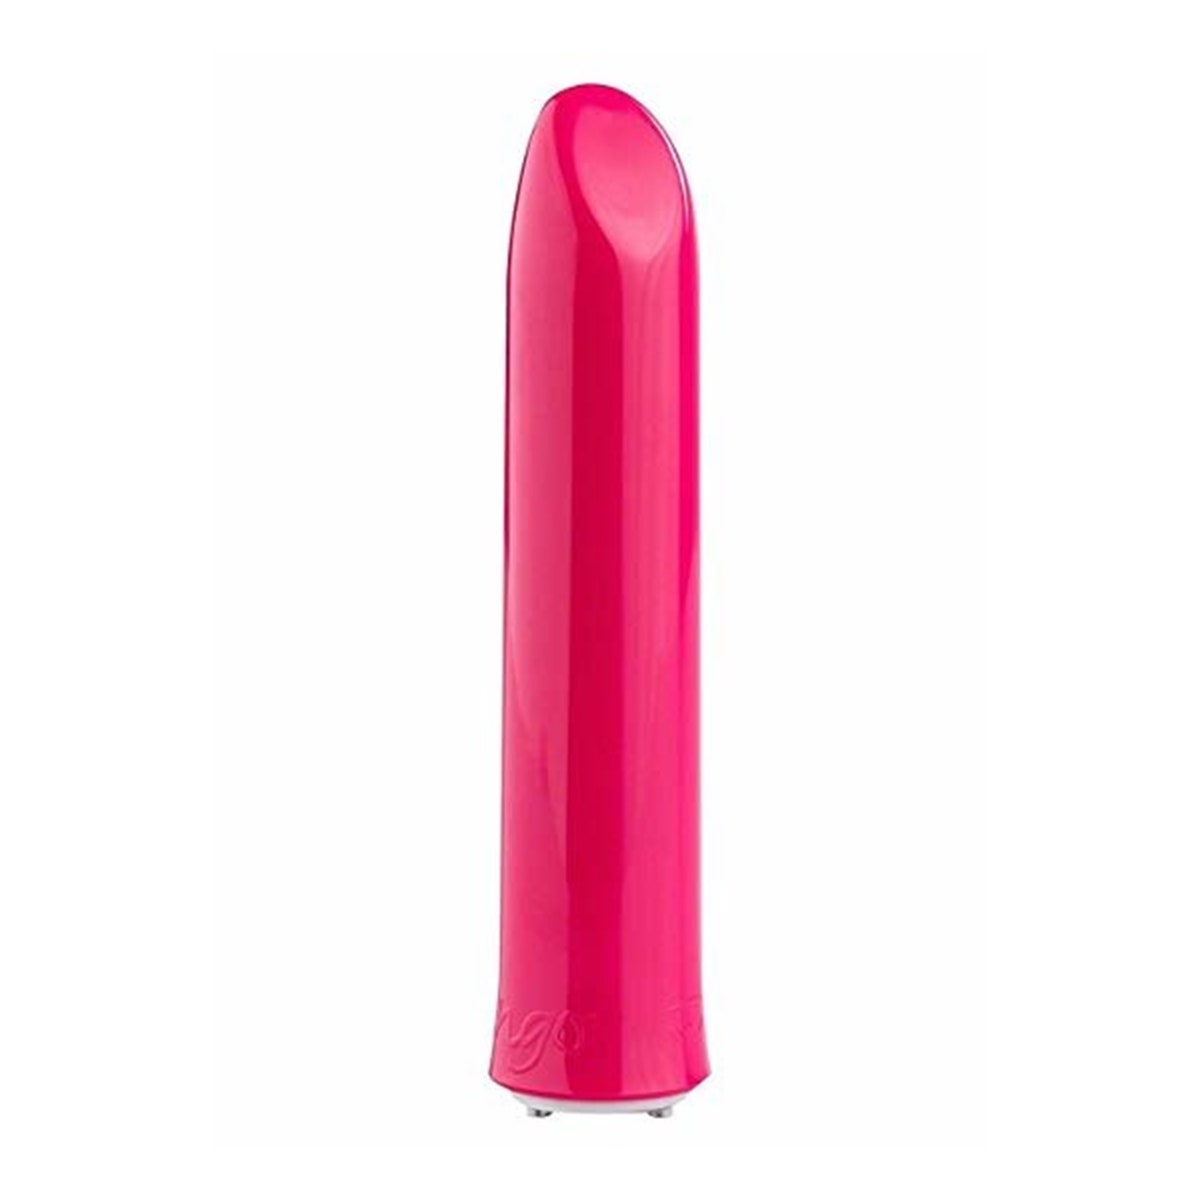 Wevibe pink cock